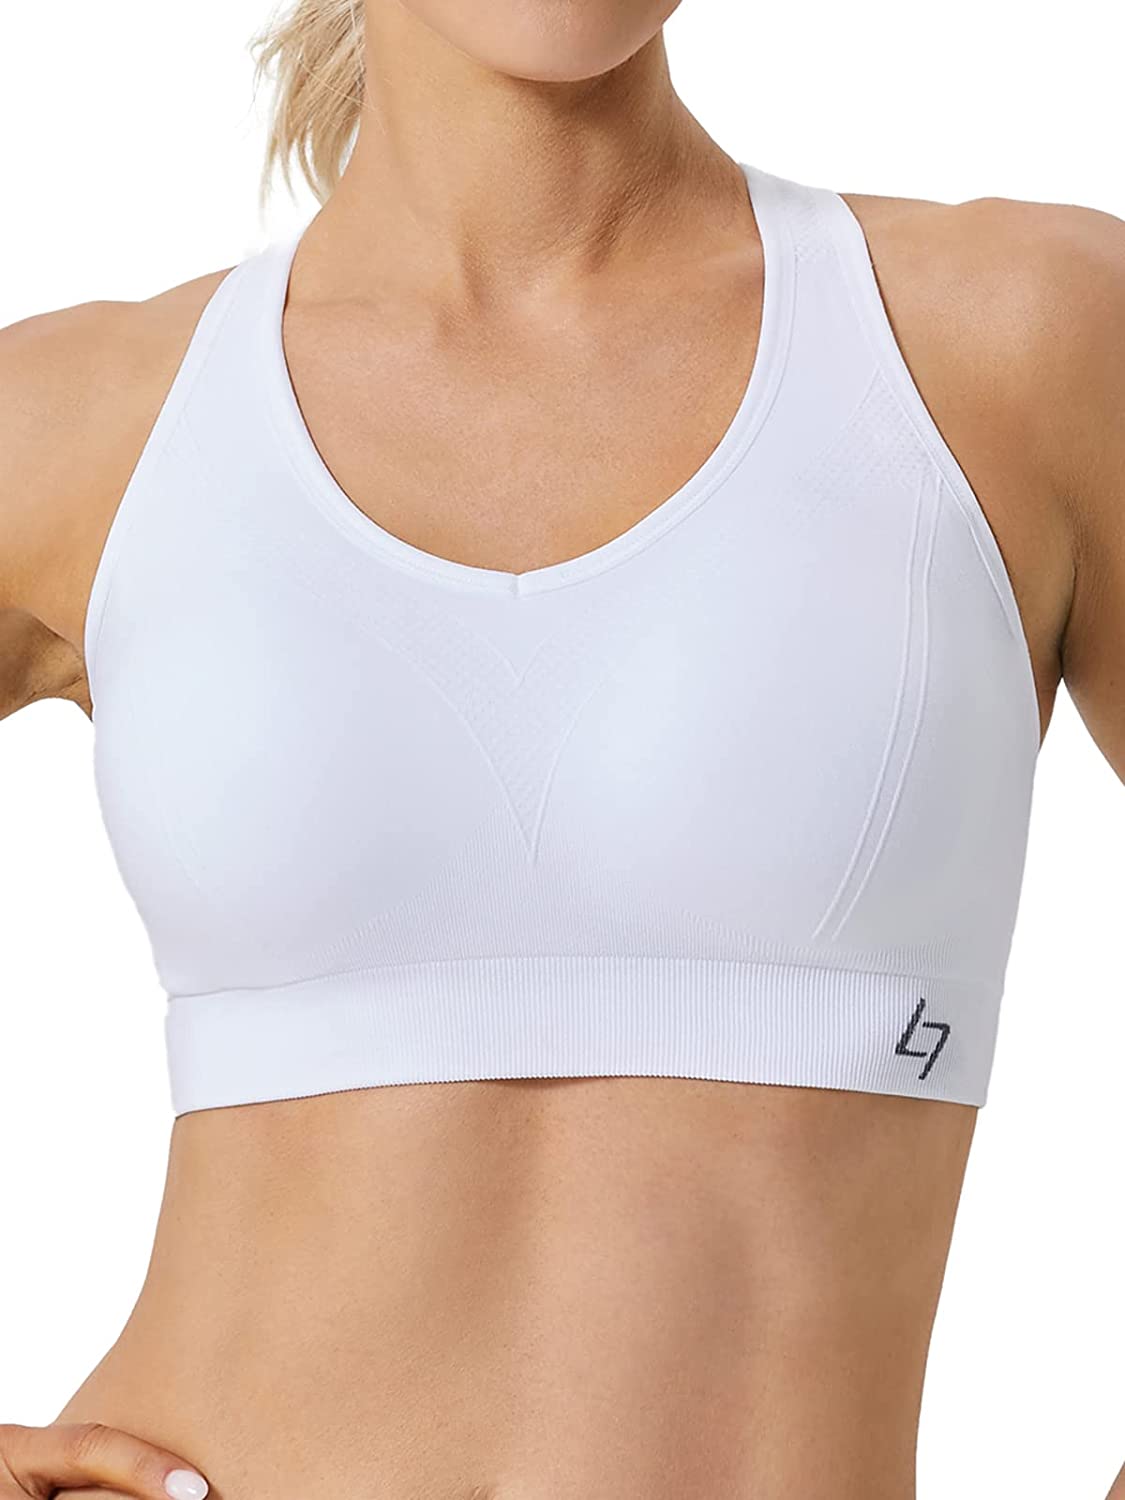 White Sports Bra Sports Bras Padded Seamless High Impact Support